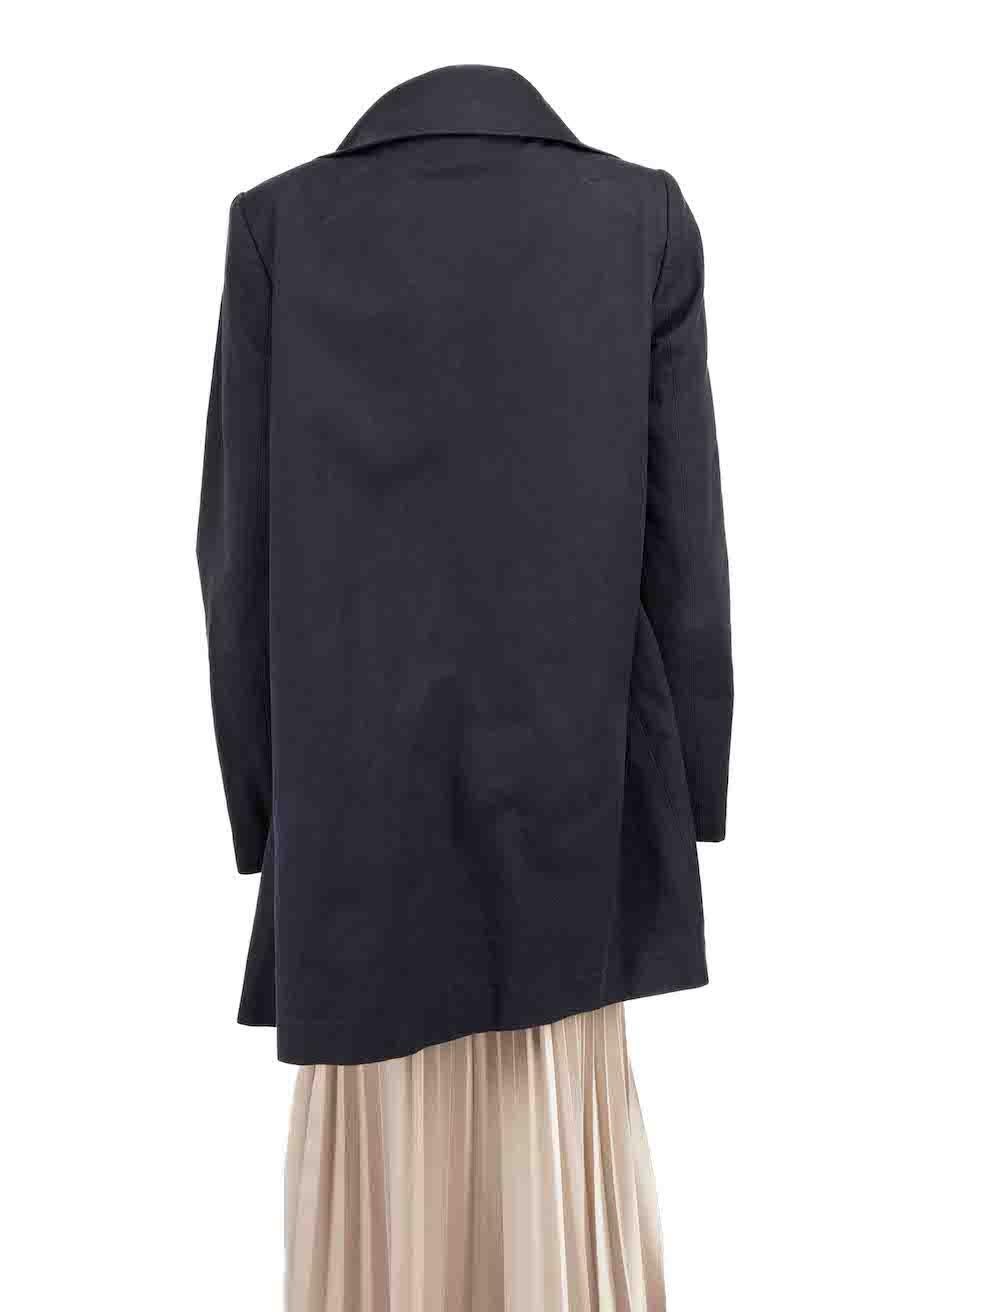 Stella McCartney Navy Gathered Accent Coat Size L In Good Condition For Sale In London, GB